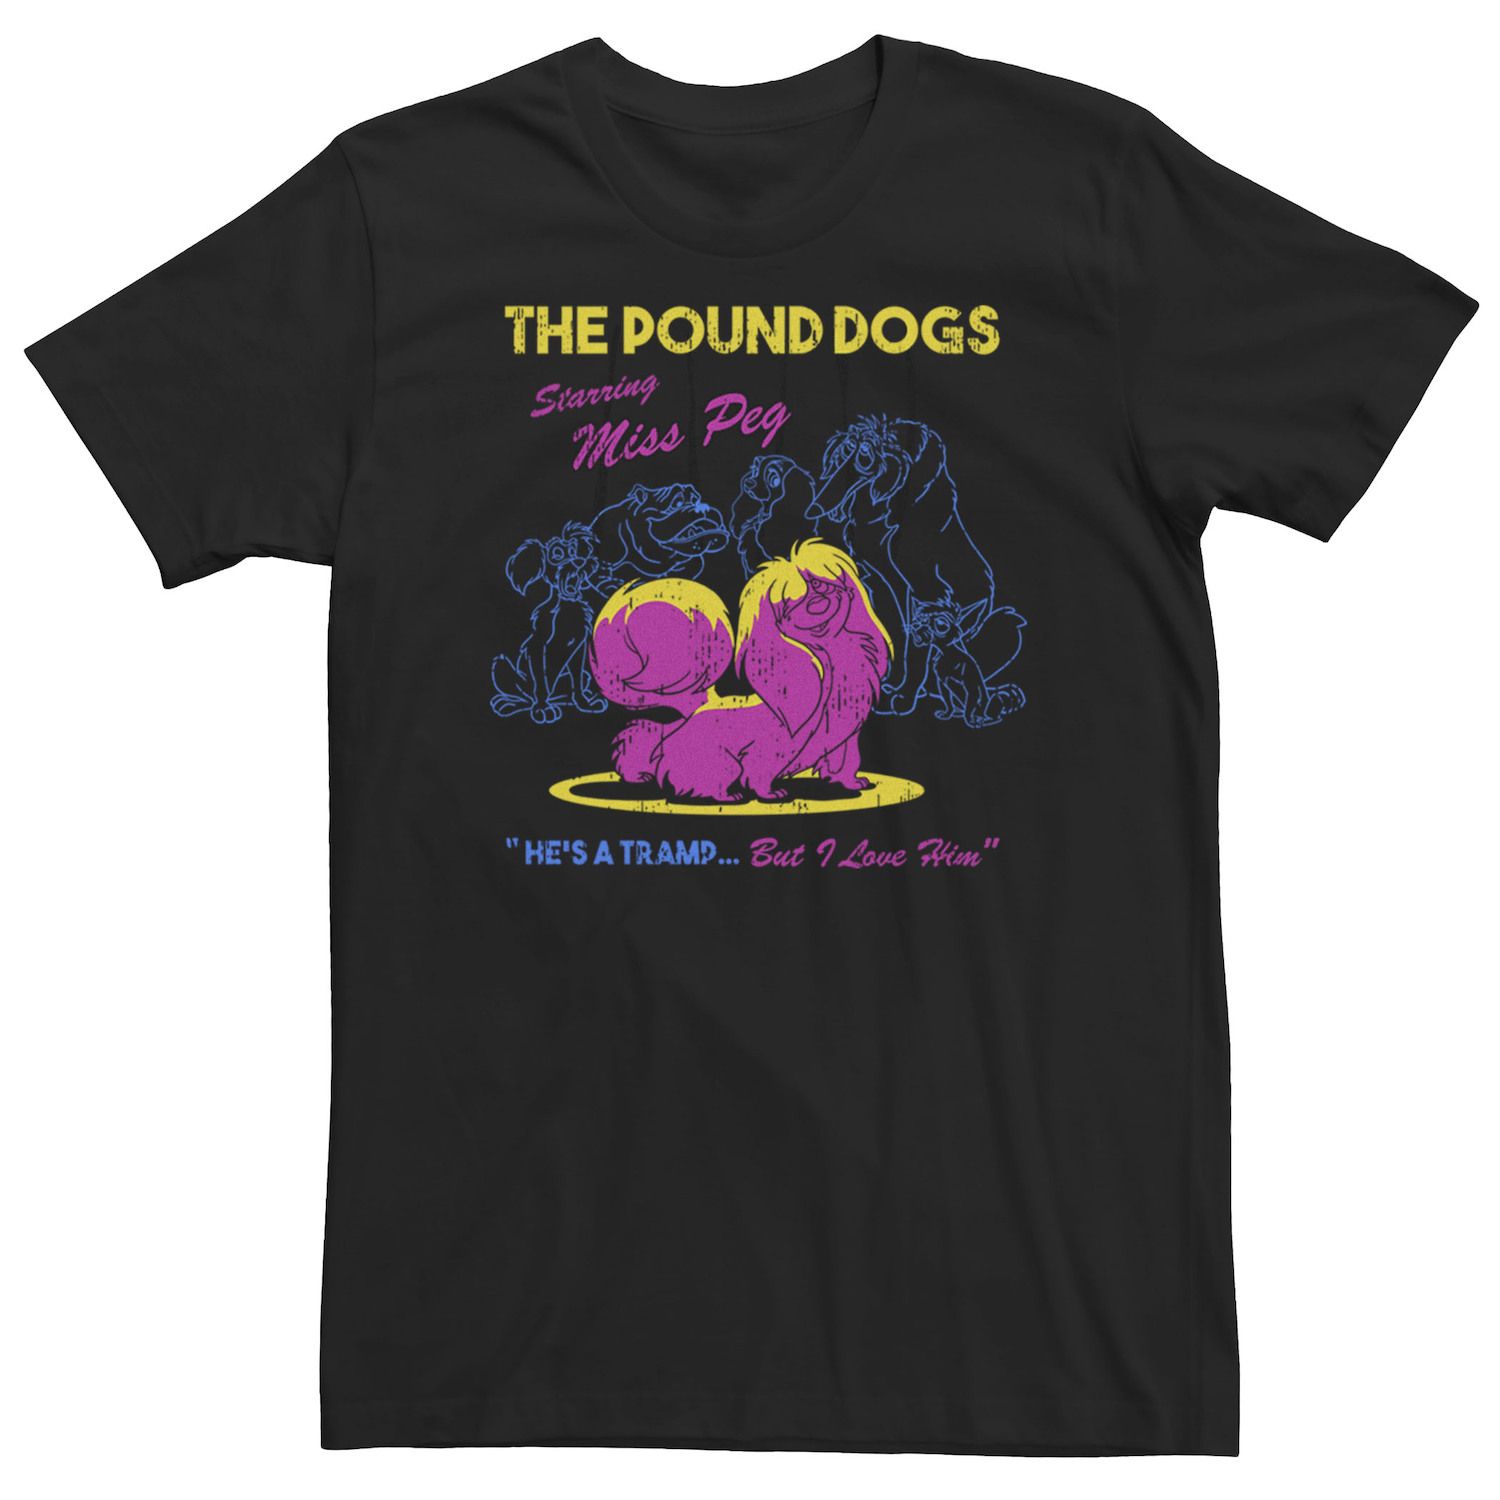 Image for Disney Big & Tall Lady & The Tramp The Pound Dogs Starring Miss Peg Tee at Kohl's.